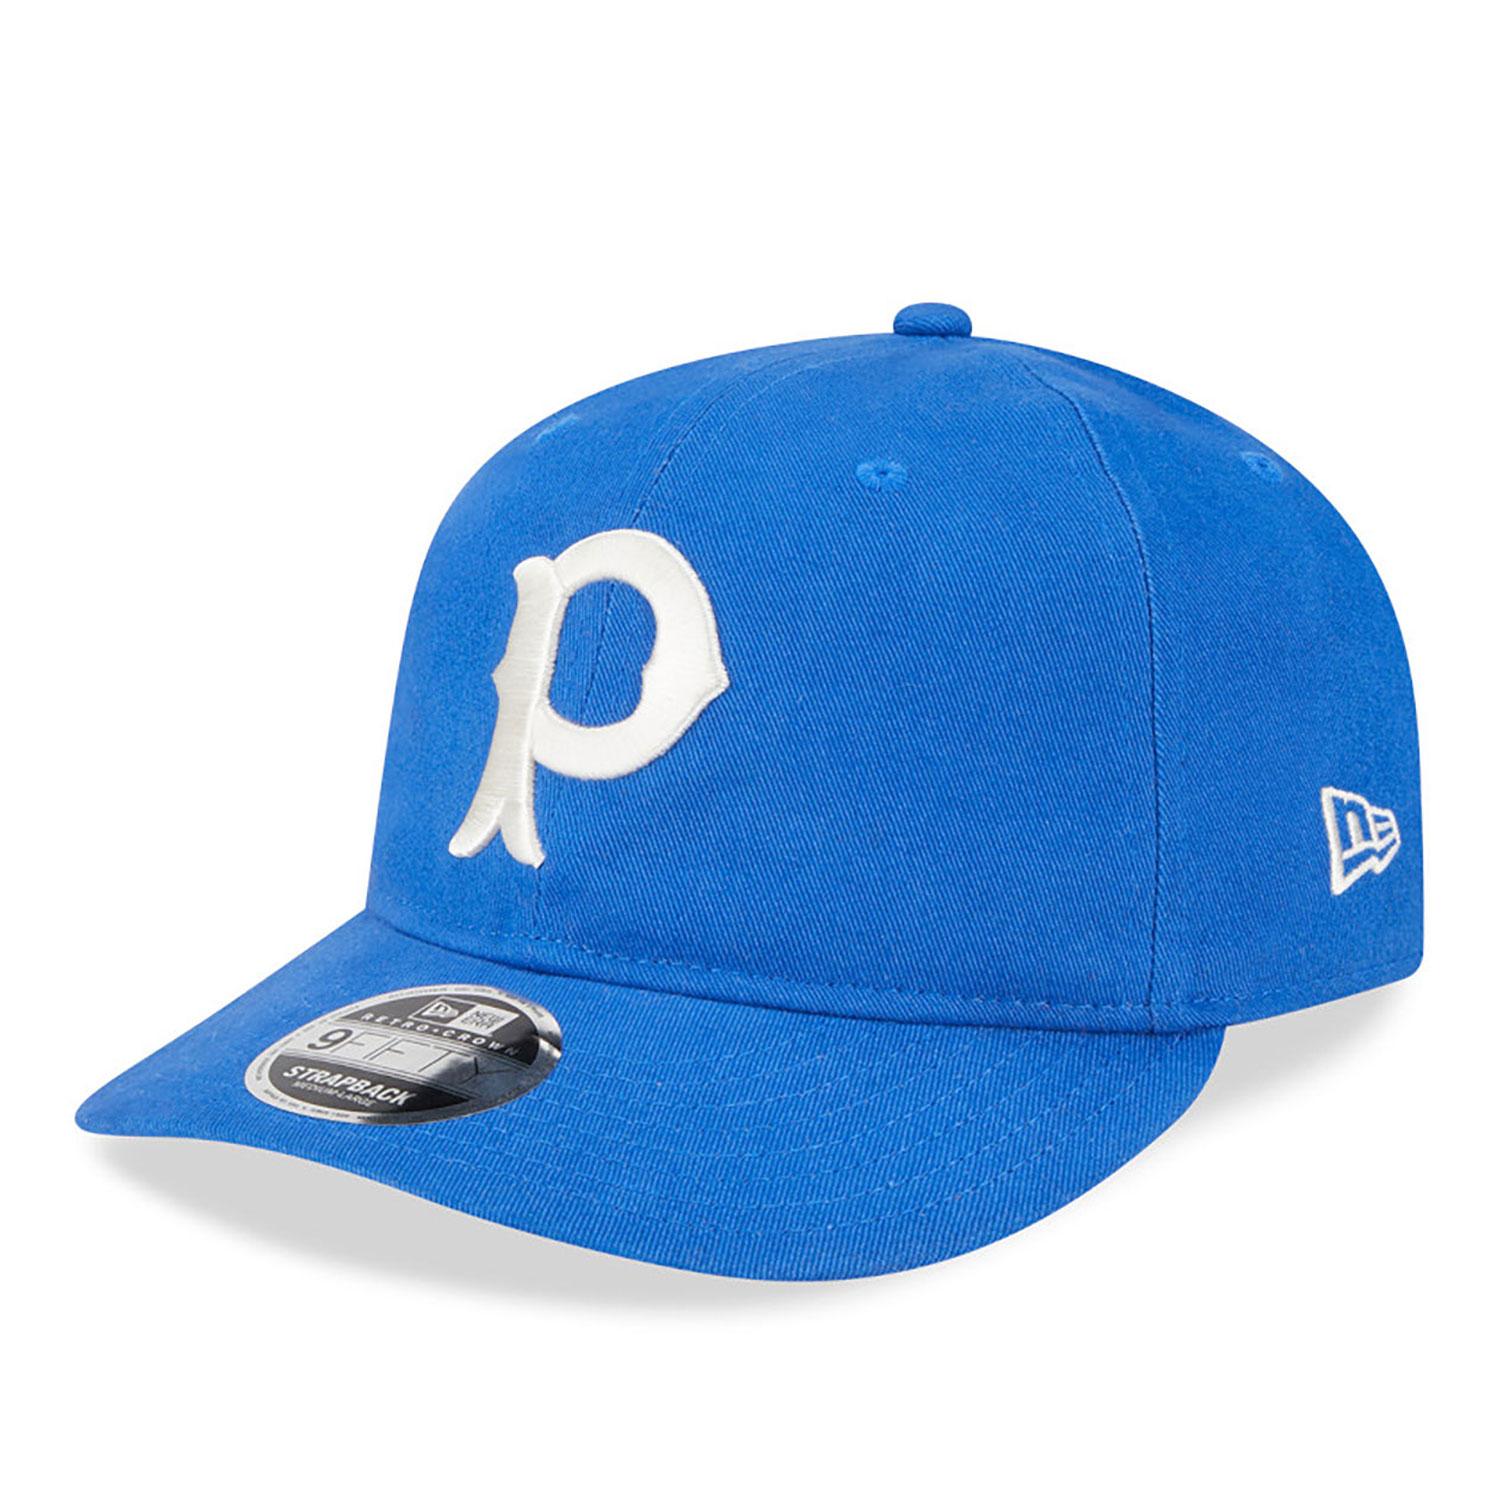 Pittsburgh Pirates MLB Cooperstown Blue Retro Crown 9FIFTY Strapback Cap